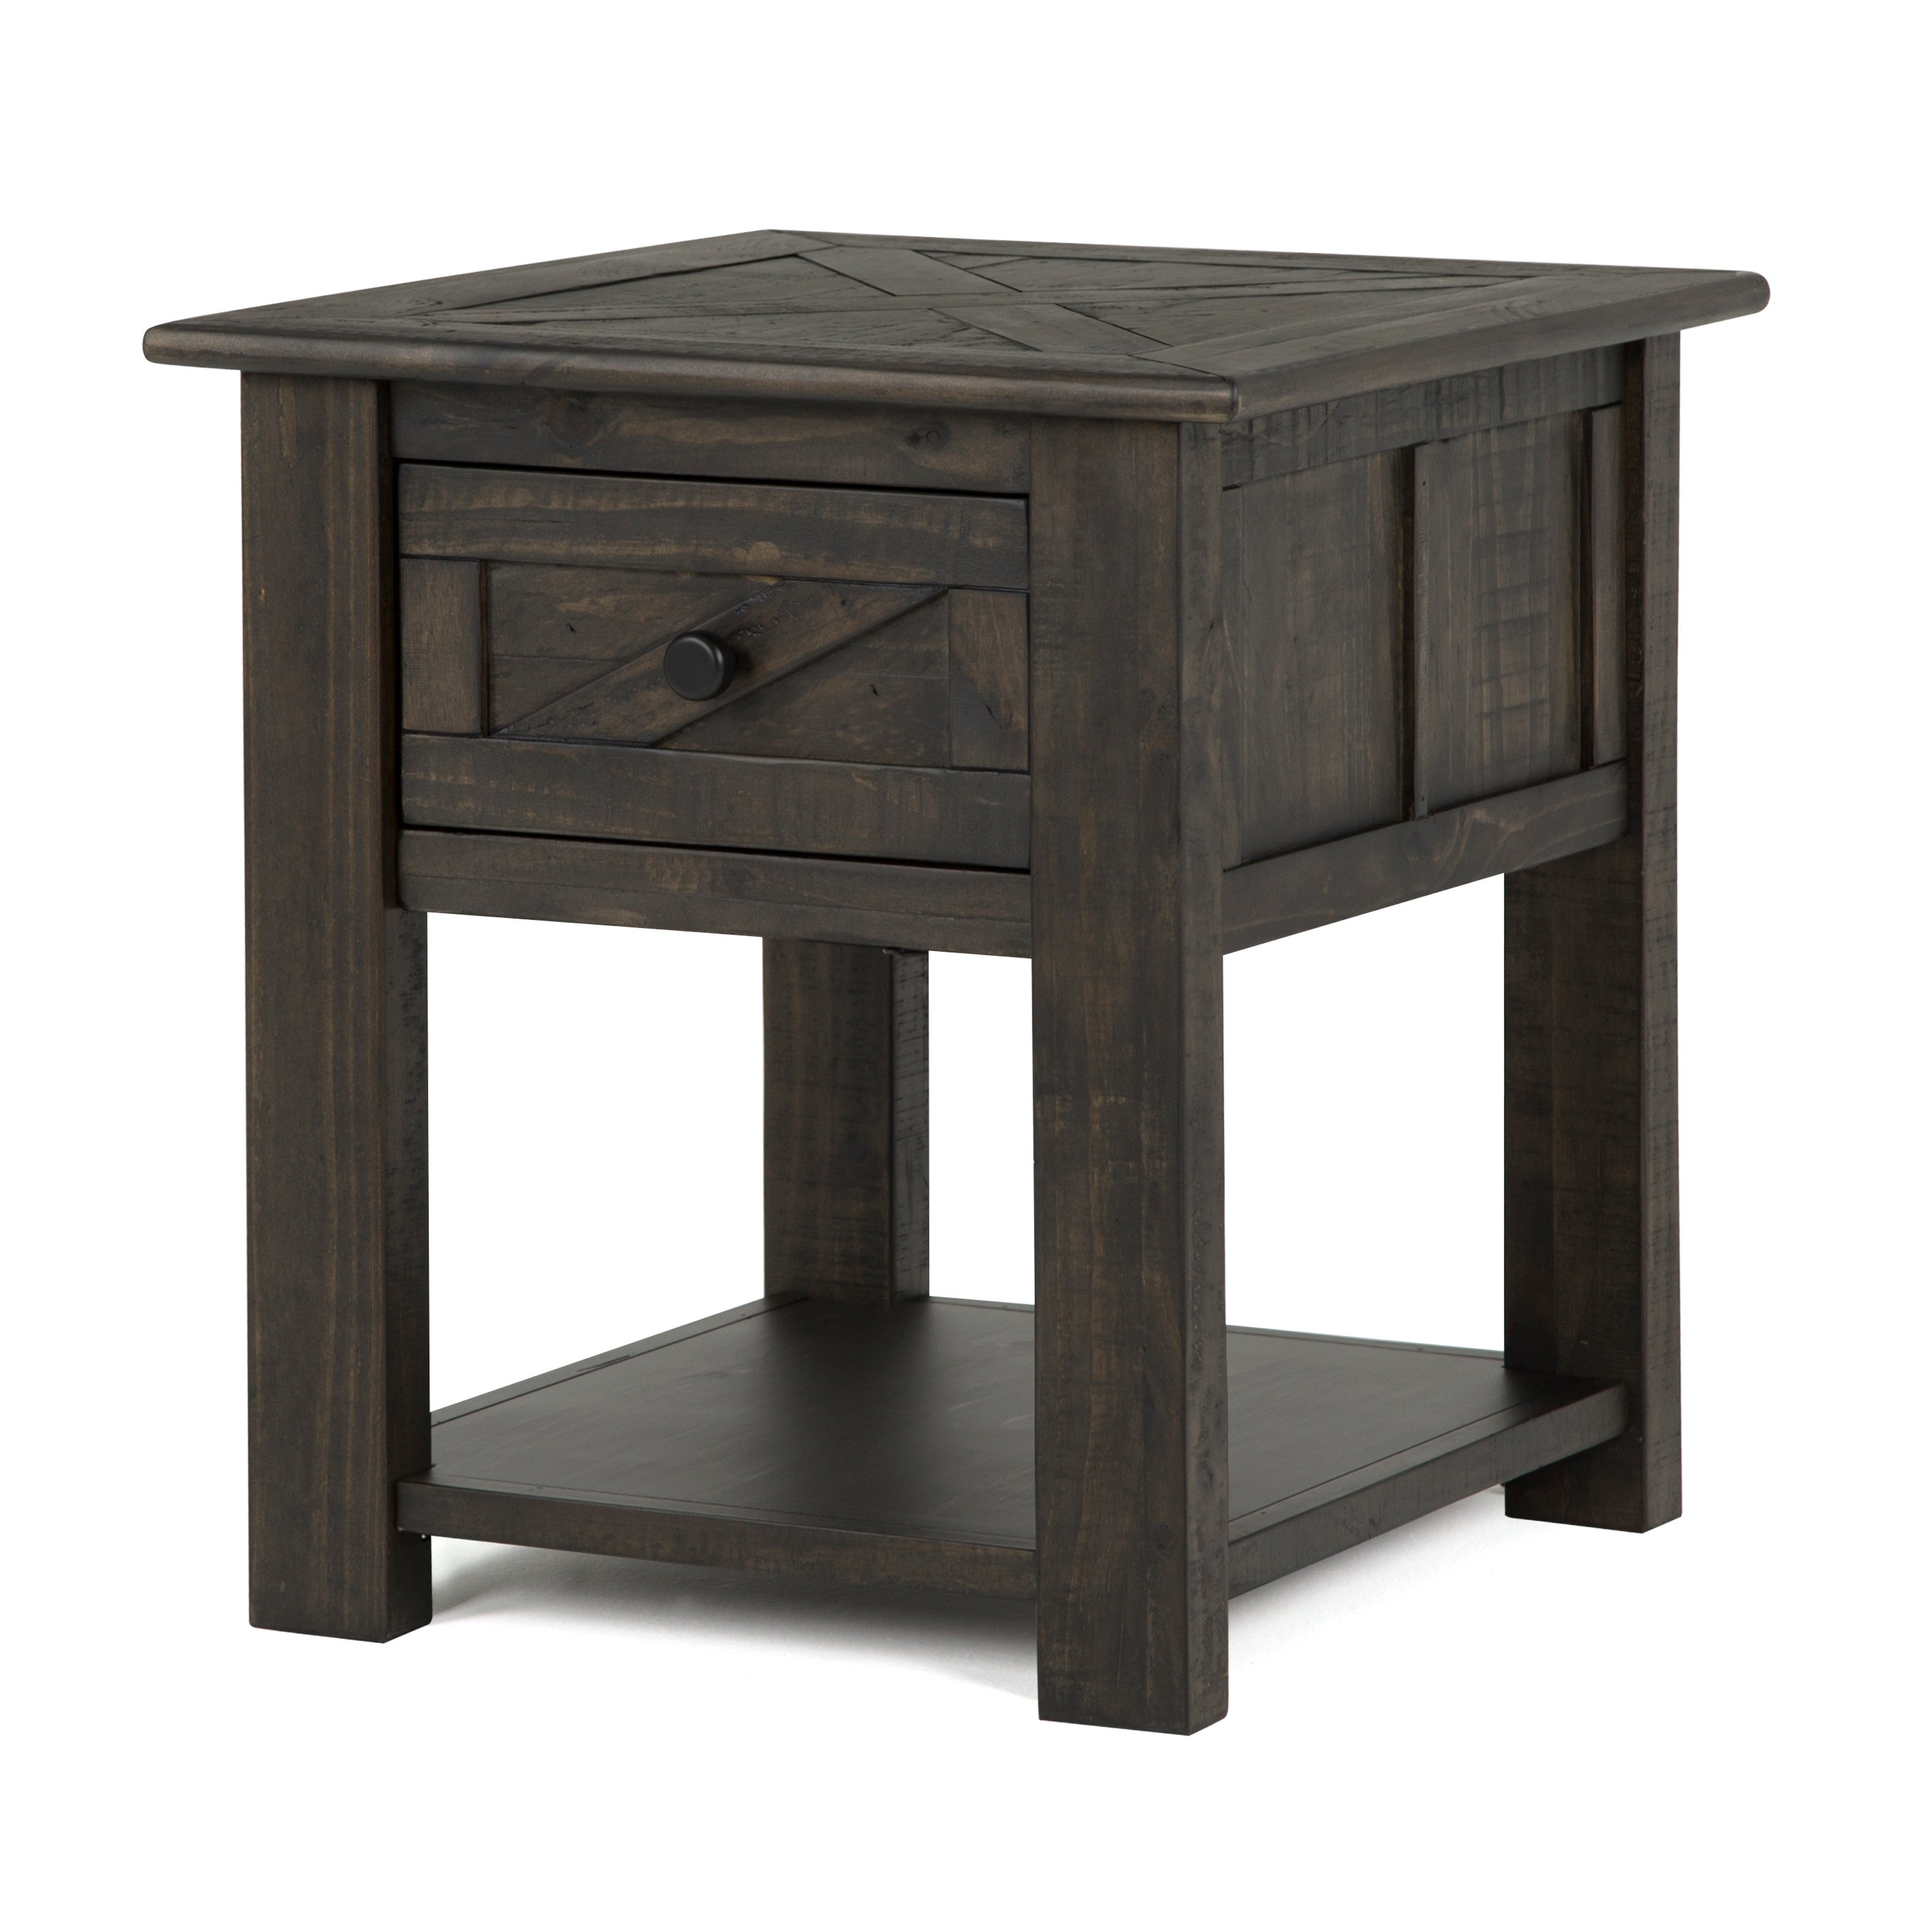 garrett rustic weathered charcoal storage end table tables furniture free shipping today rising coffee inch square pine side stand craigslist dining broyhill ottawa log set brown